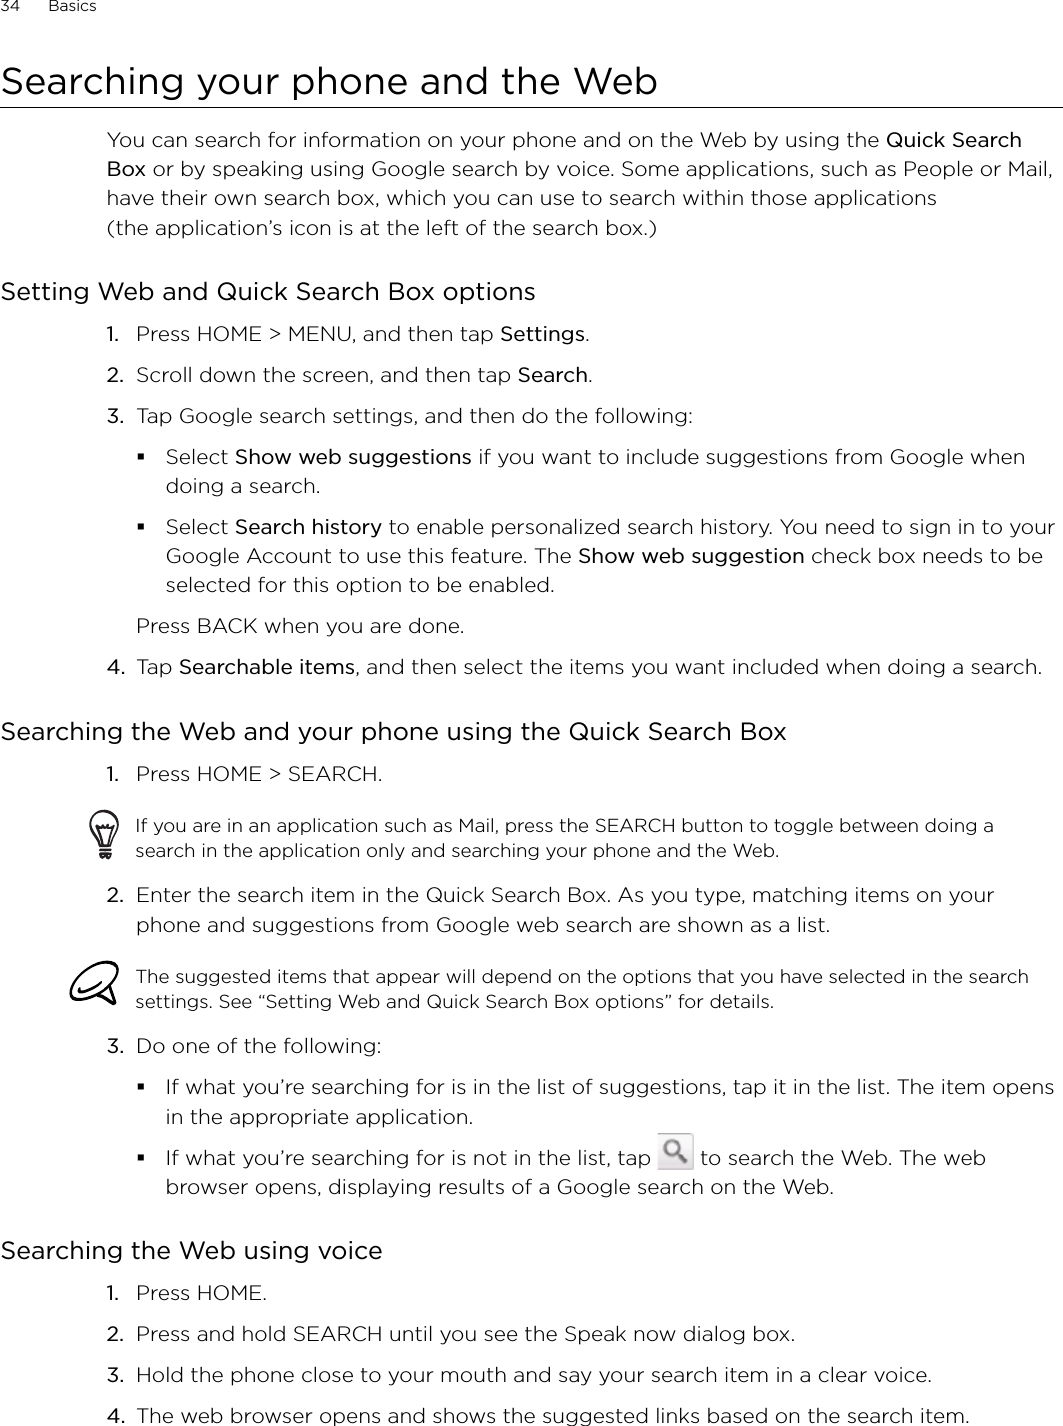 34      Basics      Searching your phone and the WebYou can search for information on your phone and on the Web by using the Quick Search Box or by speaking using Google search by voice. Some applications, such as People or Mail, have their own search box, which you can use to search within those applications  (the application’s icon is at the left of the search box.)Setting Web and Quick Search Box optionsPress HOME &gt; MENU, and then tap Settings. Scroll down the screen, and then tap Search. Tap Google search settings, and then do the following:Select Show web suggestions if you want to include suggestions from Google when doing a search.Select Search history to enable personalized search history. You need to sign in to your Google Account to use this feature. The Show web suggestion check box needs to be selected for this option to be enabled. Press BACK when you are done. 4.  Tap Searchable items, and then select the items you want included when doing a search. Searching the Web and your phone using the Quick Search BoxPress HOME &gt; SEARCH. If you are in an application such as Mail, press the SEARCH button to toggle between doing a search in the application only and searching your phone and the Web. 2.  Enter the search item in the Quick Search Box. As you type, matching items on your phone and suggestions from Google web search are shown as a list.The suggested items that appear will depend on the options that you have selected in the search settings. See “Setting Web and Quick Search Box options” for details. 3.  Do one of the following:If what you’re searching for is in the list of suggestions, tap it in the list. The item opens in the appropriate application.If what you’re searching for is not in the list, tap   to search the Web. The web browser opens, displaying results of a Google search on the Web.Searching the Web using voicePress HOME. Press and hold SEARCH until you see the Speak now dialog box.Hold the phone close to your mouth and say your search item in a clear voice.The web browser opens and shows the suggested links based on the search item. 1.2.3.1.1.2.3.4.